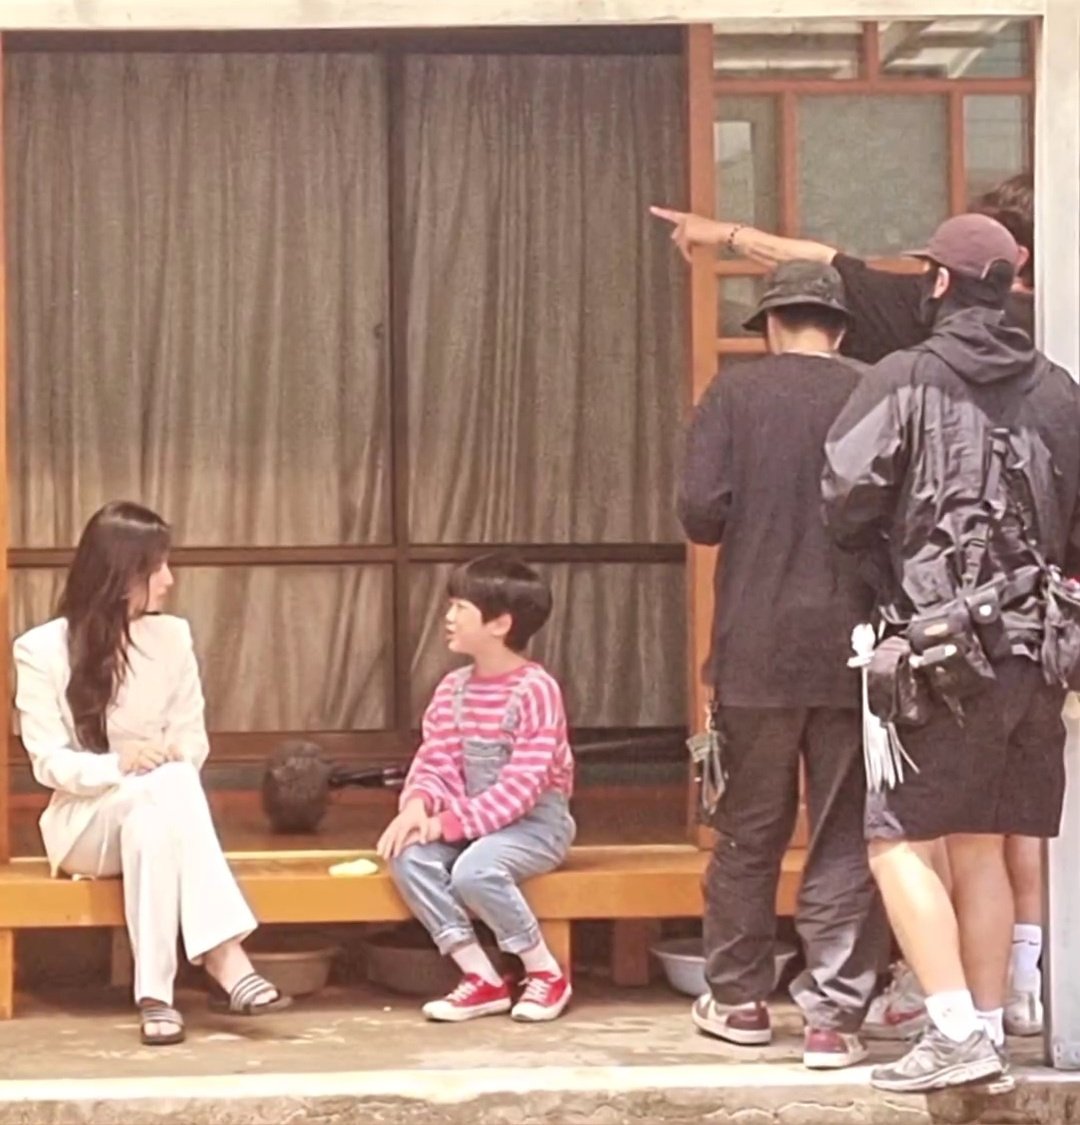 bts from the scene with baek hoyeol and haein shared by Kim Dongha on Ig. This is making me nostalgic 🥺 #Kimjiwon #QueenOfTears